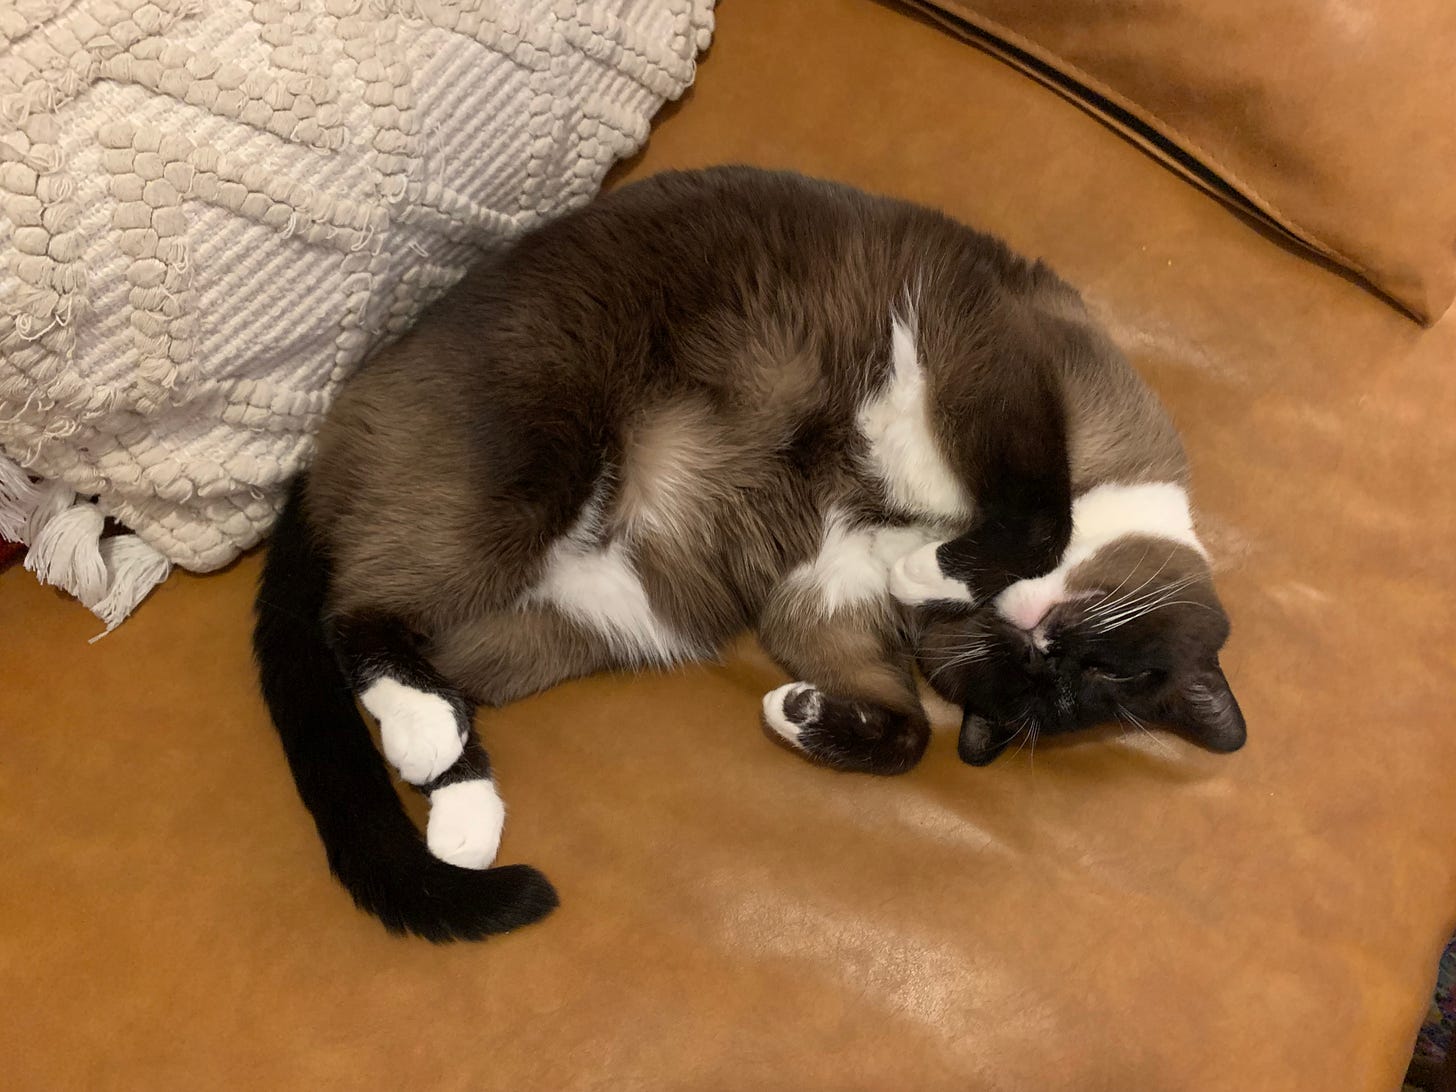 Adorable cat belly-up on a leather couch